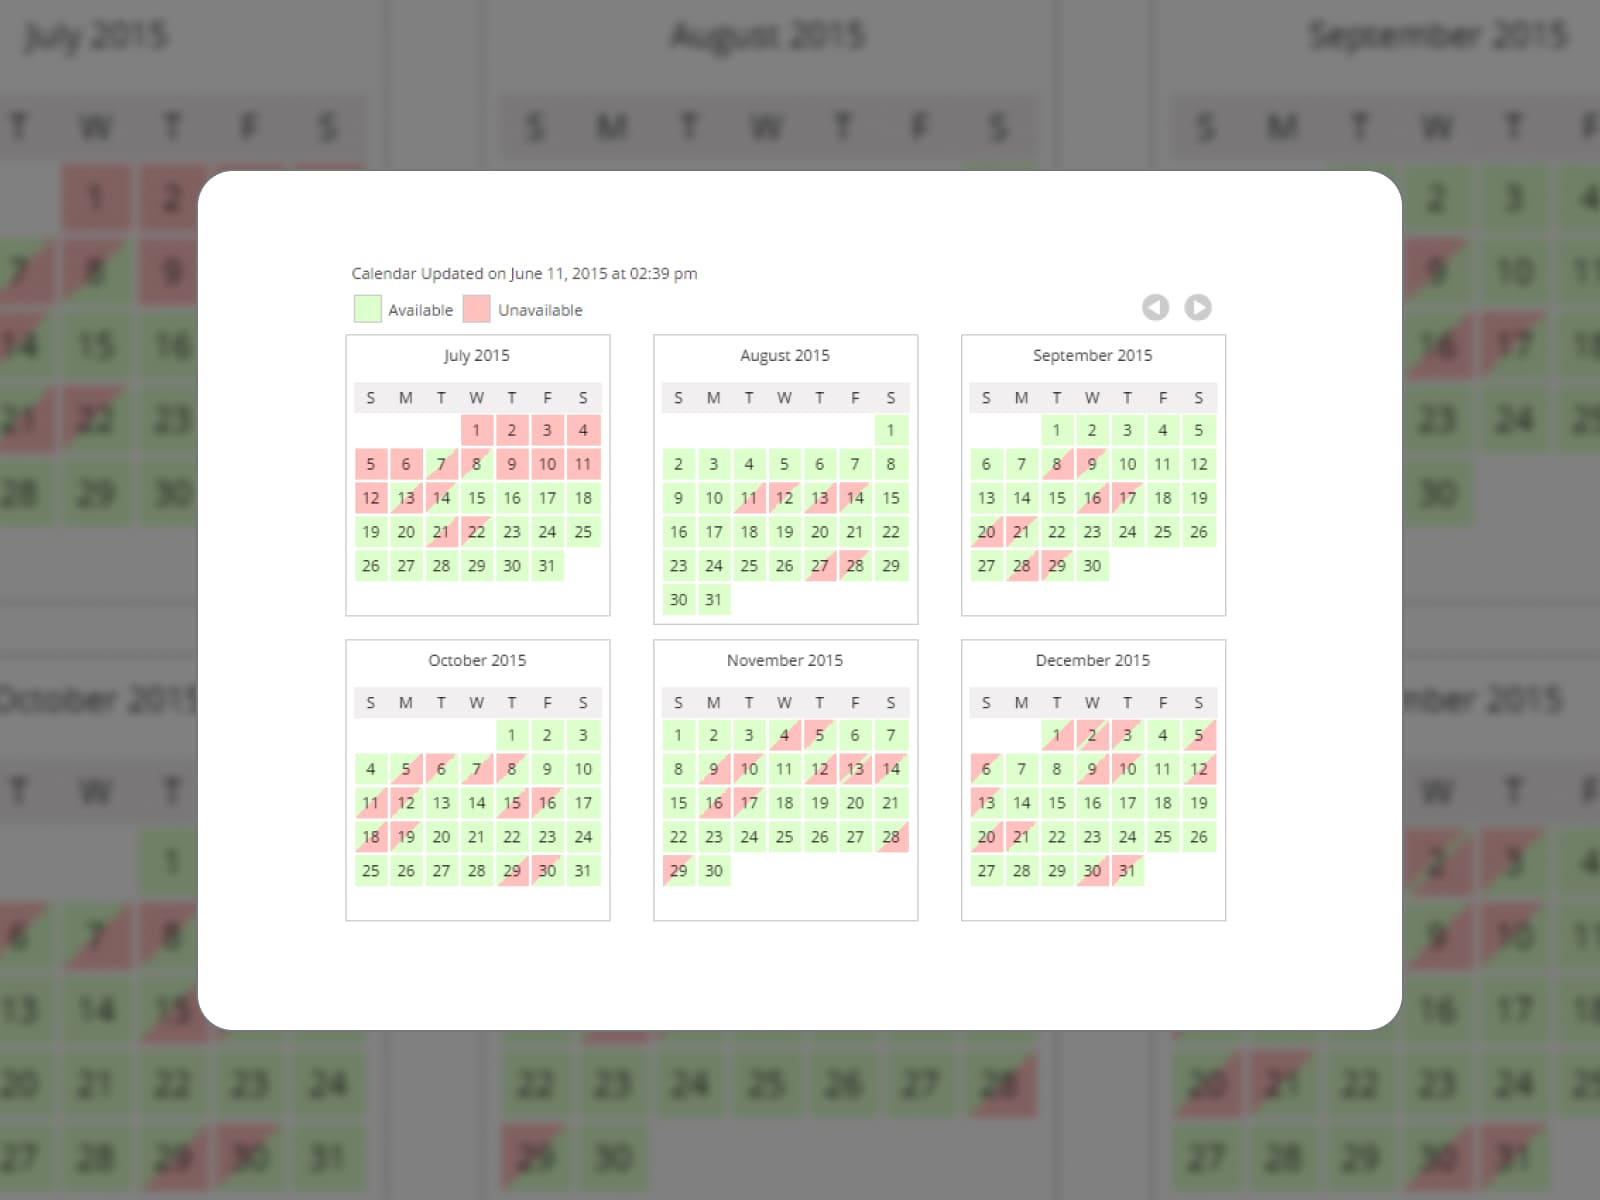 Available and unavailable days marked in a calendar of the VR calendar.